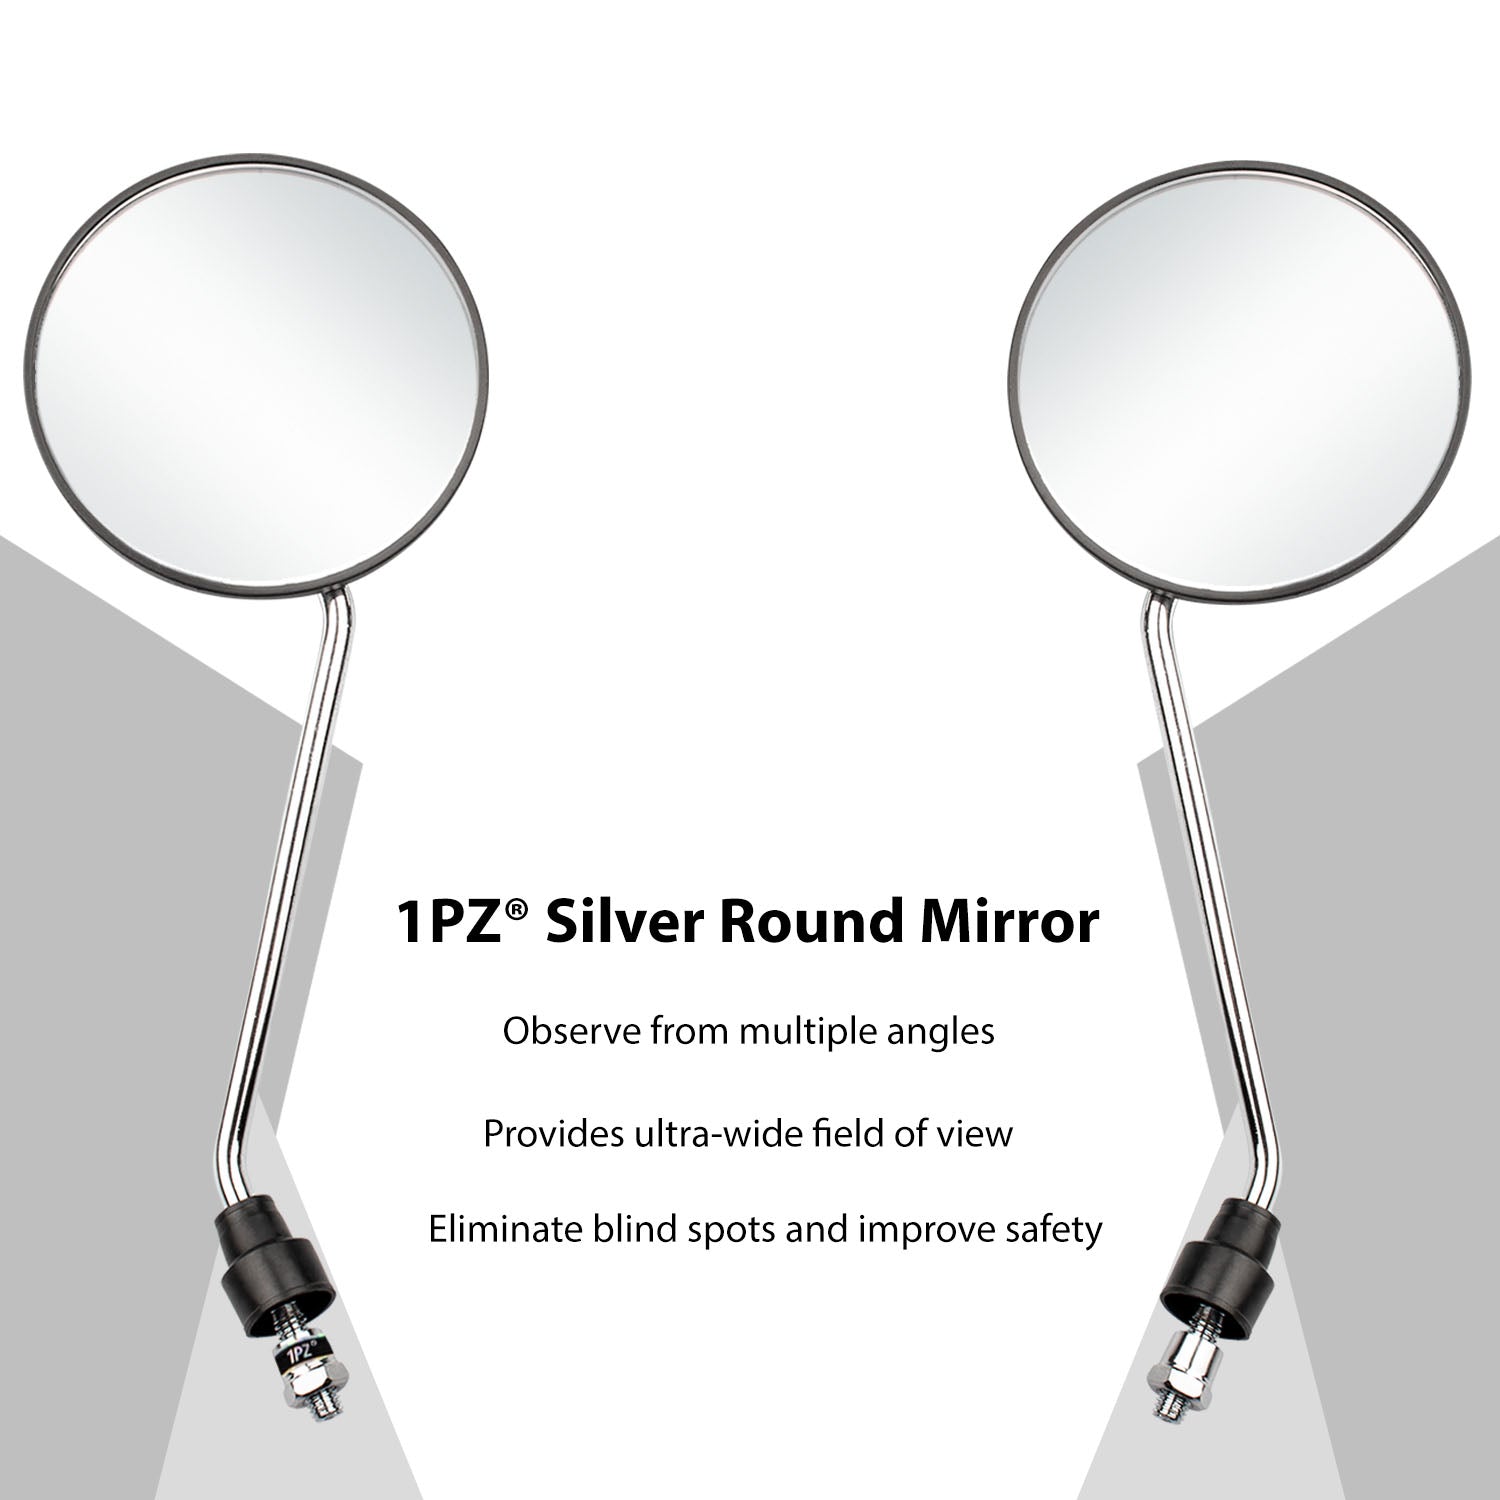 1PZ Adjustable Universal M8x1.0 Antenna Style Retro Vintage Round Mirrors with 7/8" 22mm clamps for Motorcycle Go Kart ATV Scooter Dirt Bike Mini Bike Moped Quad Wheeler (CHROME)